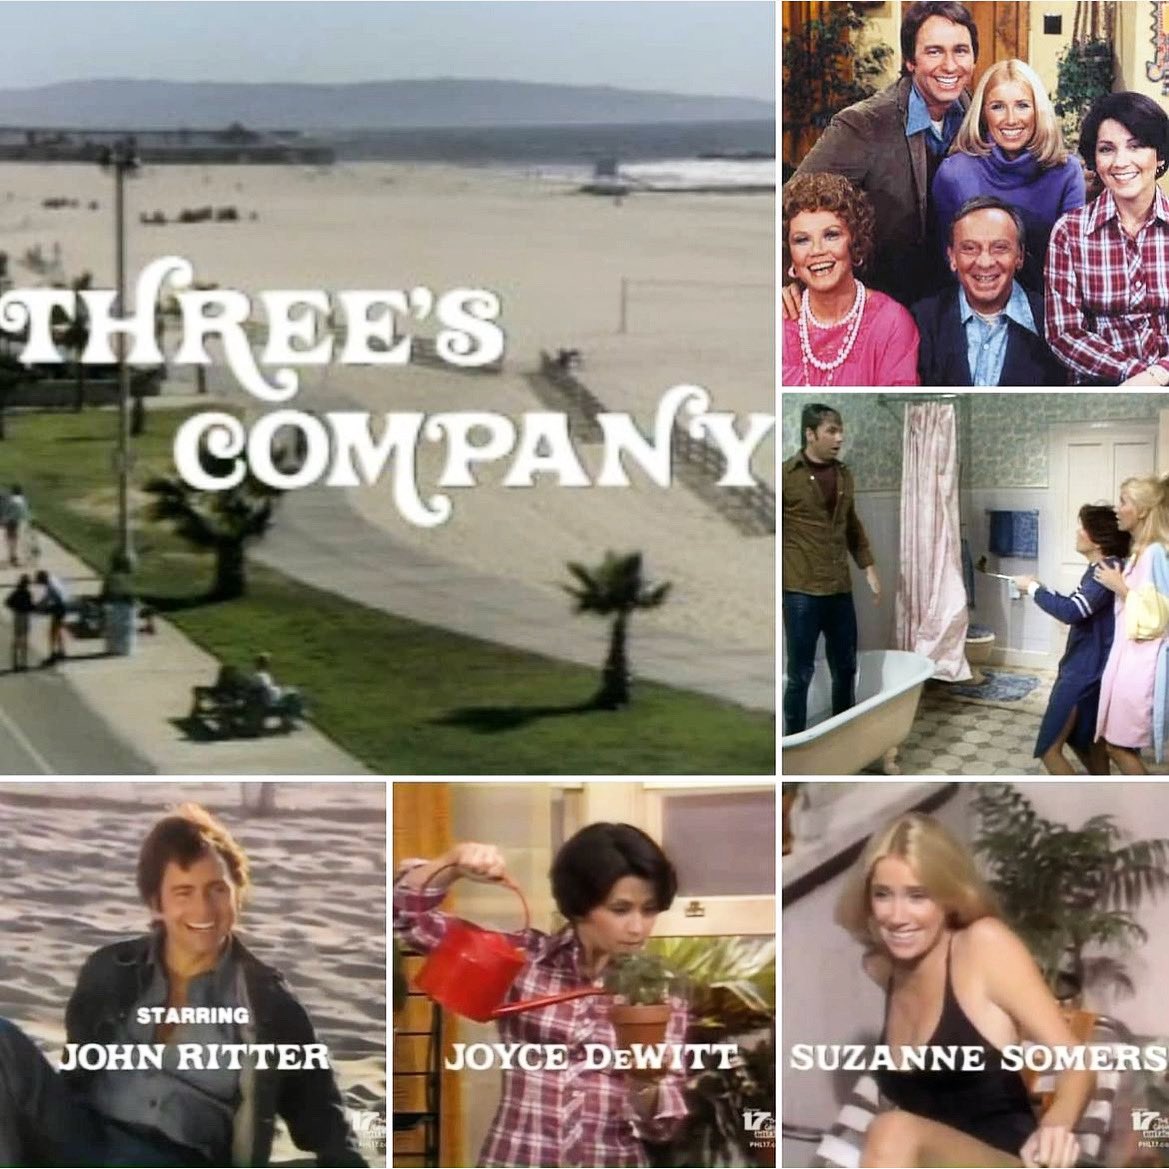 #PremieredOnThisDay:
'Three's Company'
Premiered: March 15, 1977

#ThreesCompany #JohnRitter 
#JoyceDeWitt #SuzanneSomers
#JackTripper #JanetWood
#ChrissySnow #The70s
#ILoveThe70s #70sSitcoms
#ClassicTV #ClassicTVShow 
#NormanFell #AudraLindley